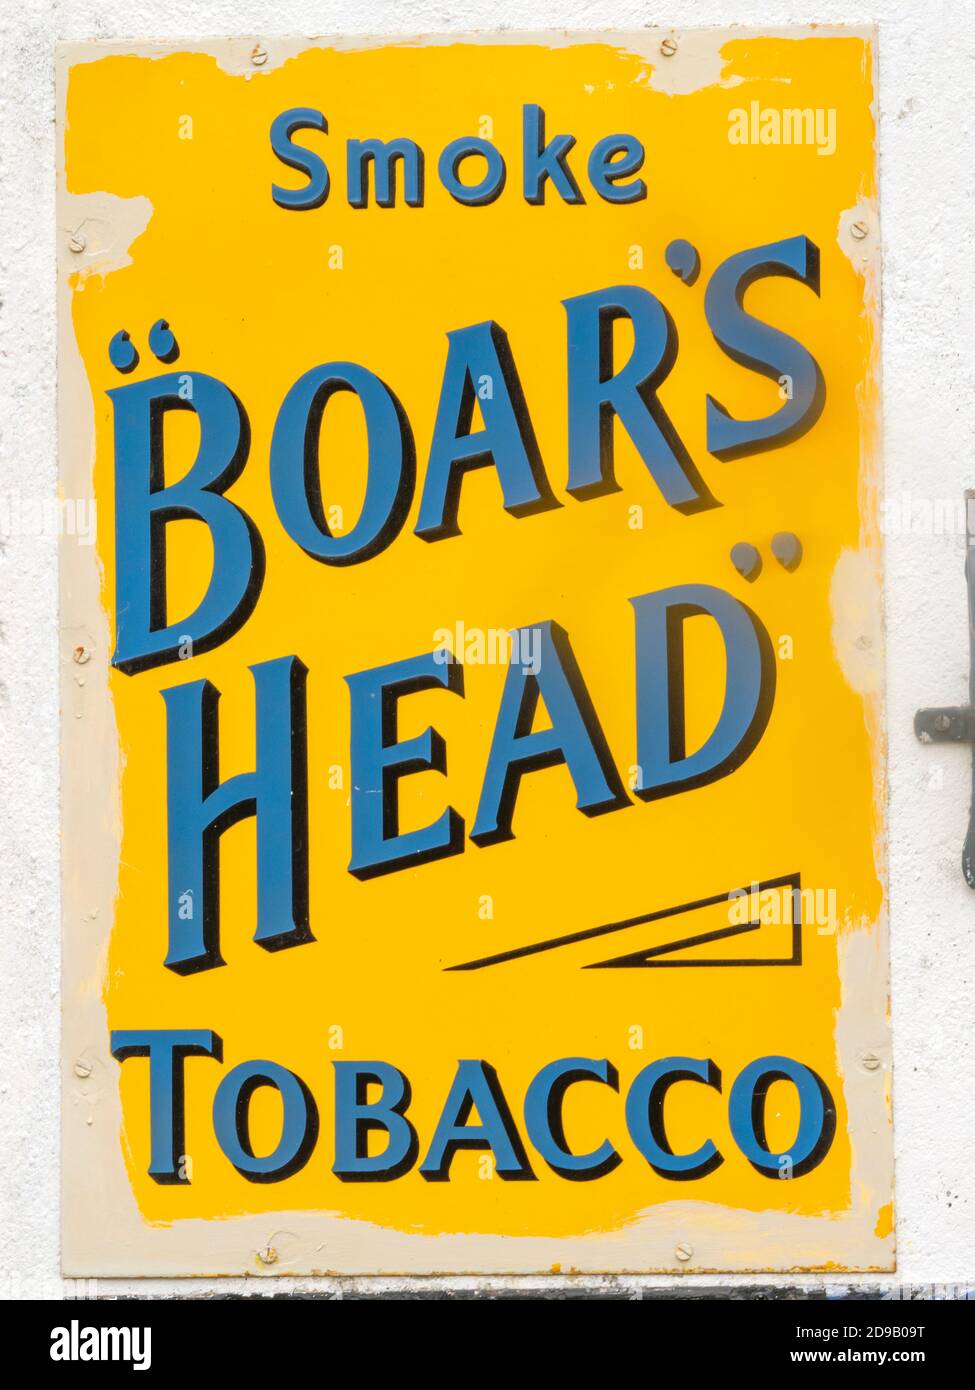 Antique metal wall advertisement sign for Boar's Head Tobacco Stock Photo